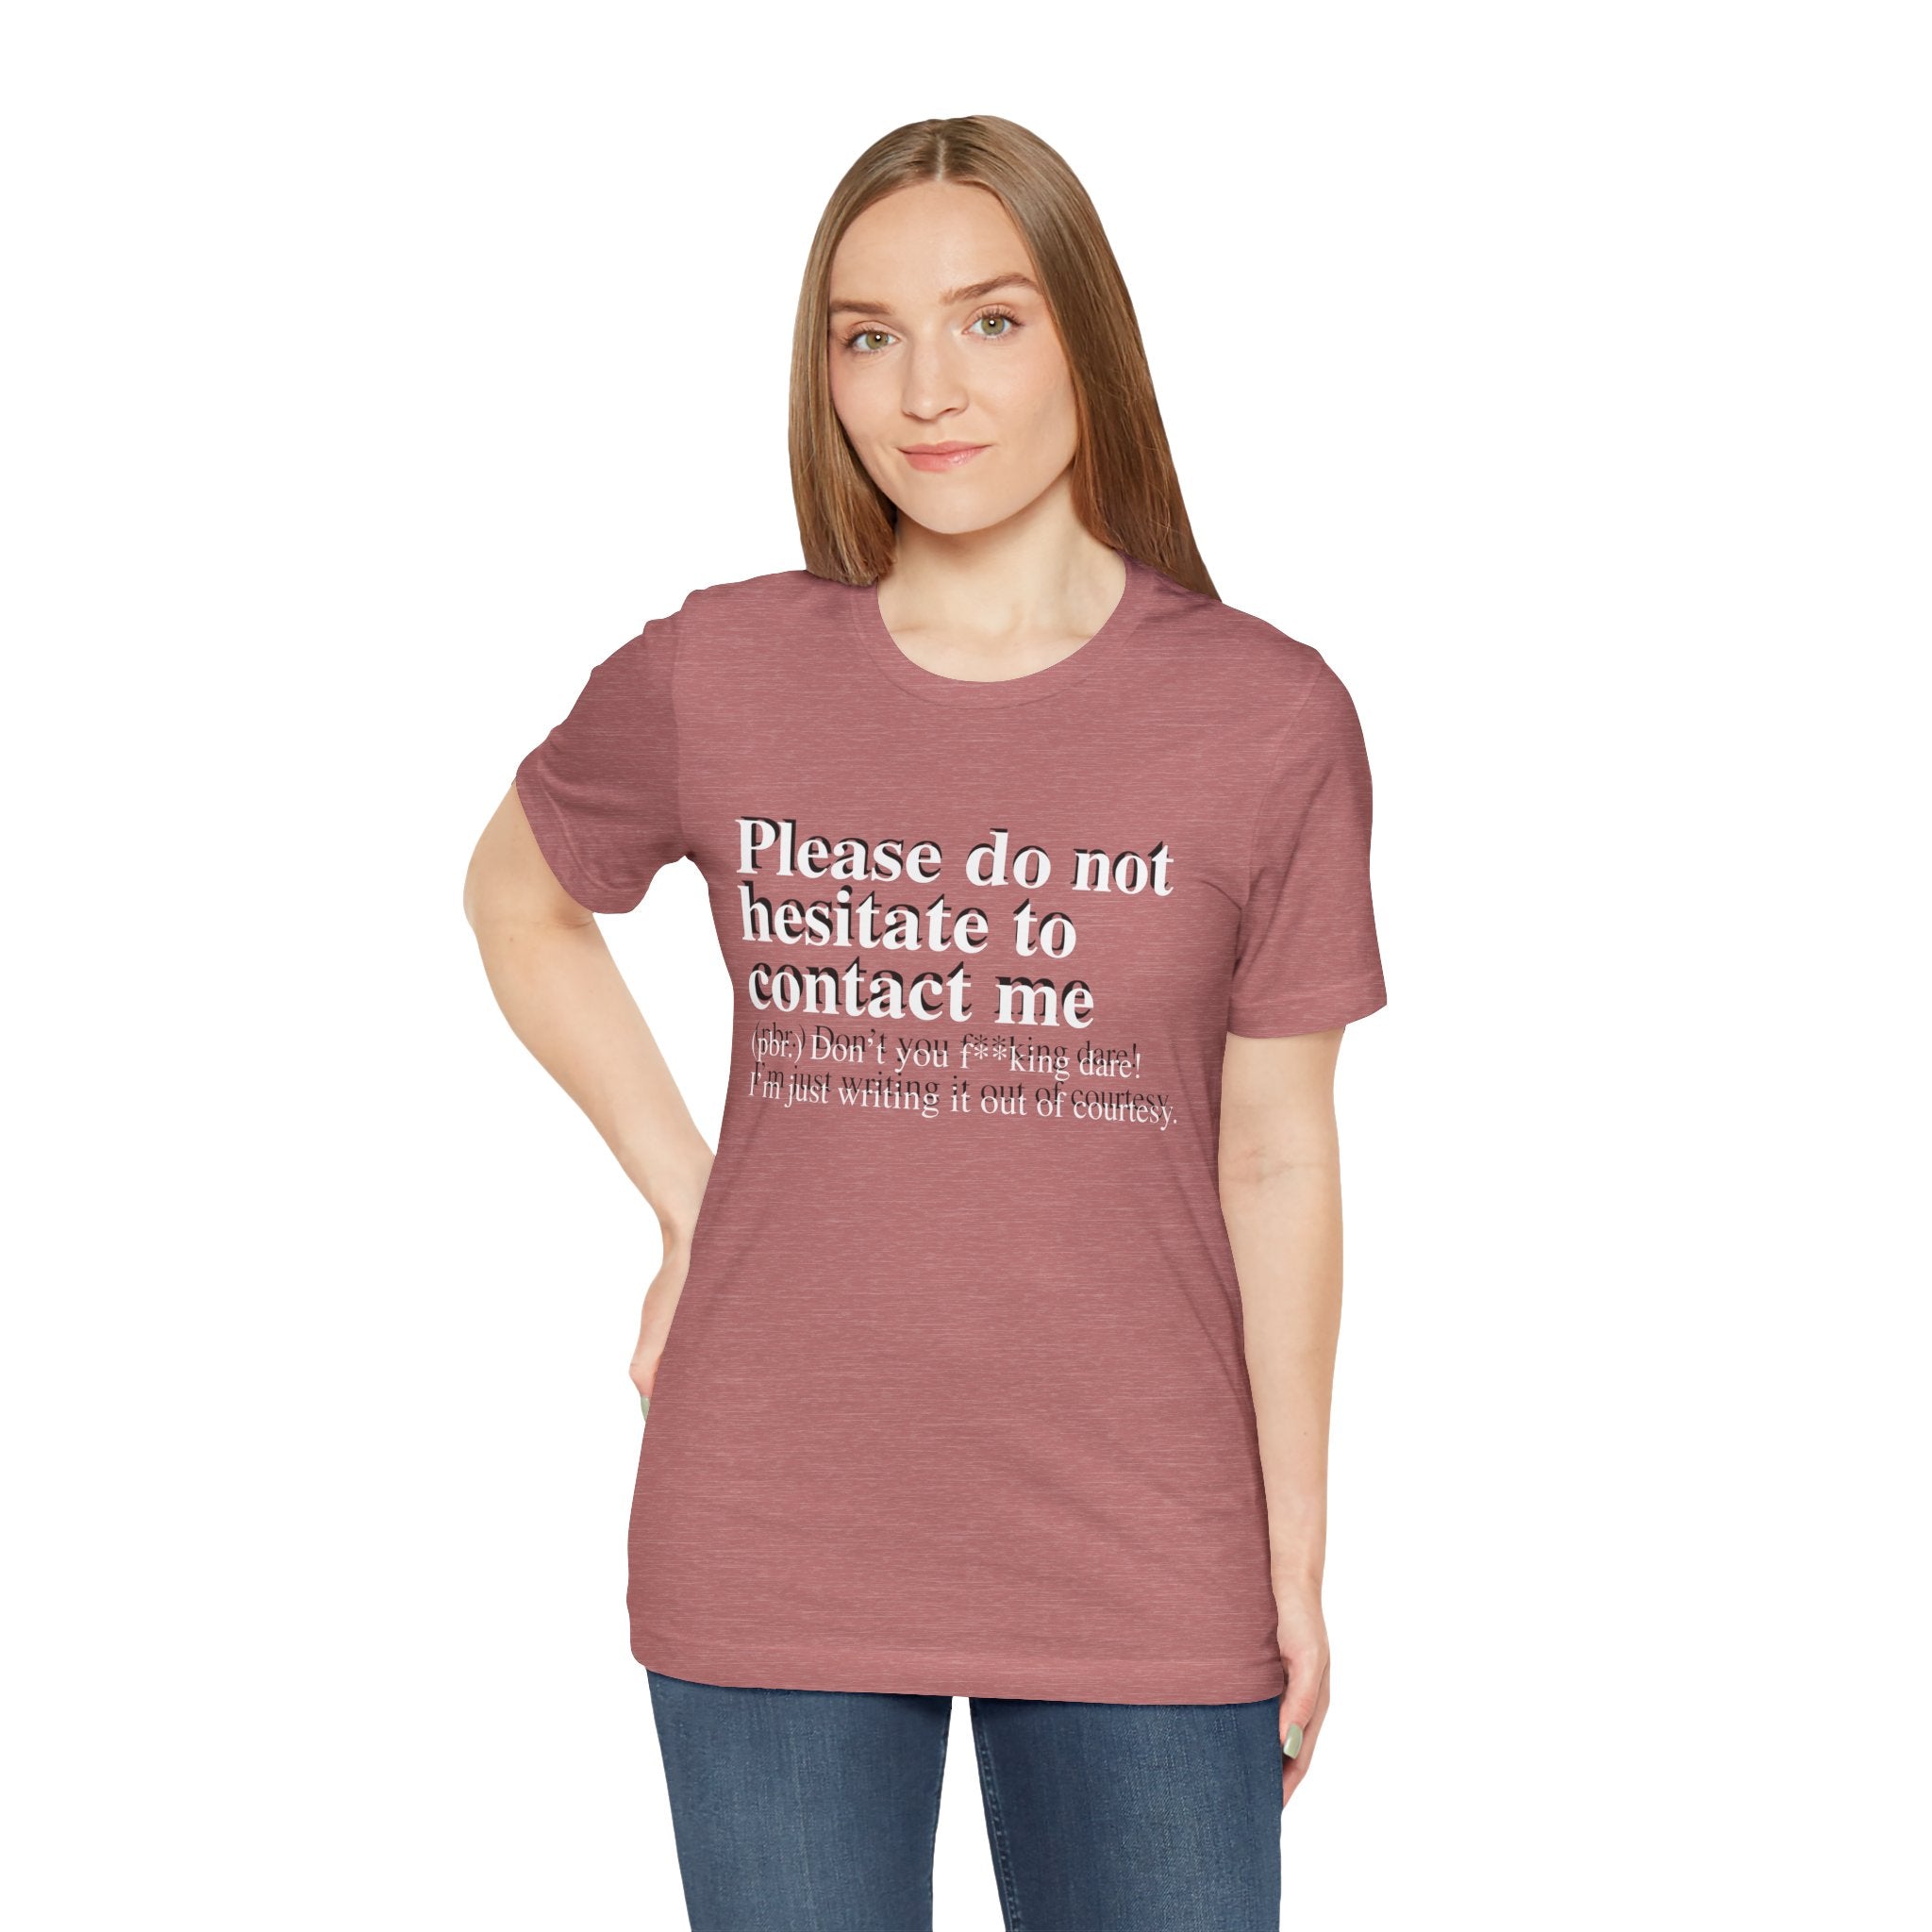 Young woman in a maroon, soft cotton Please Do Not Hesitate to Contact Me T-shirt smiles slightly at the camera.